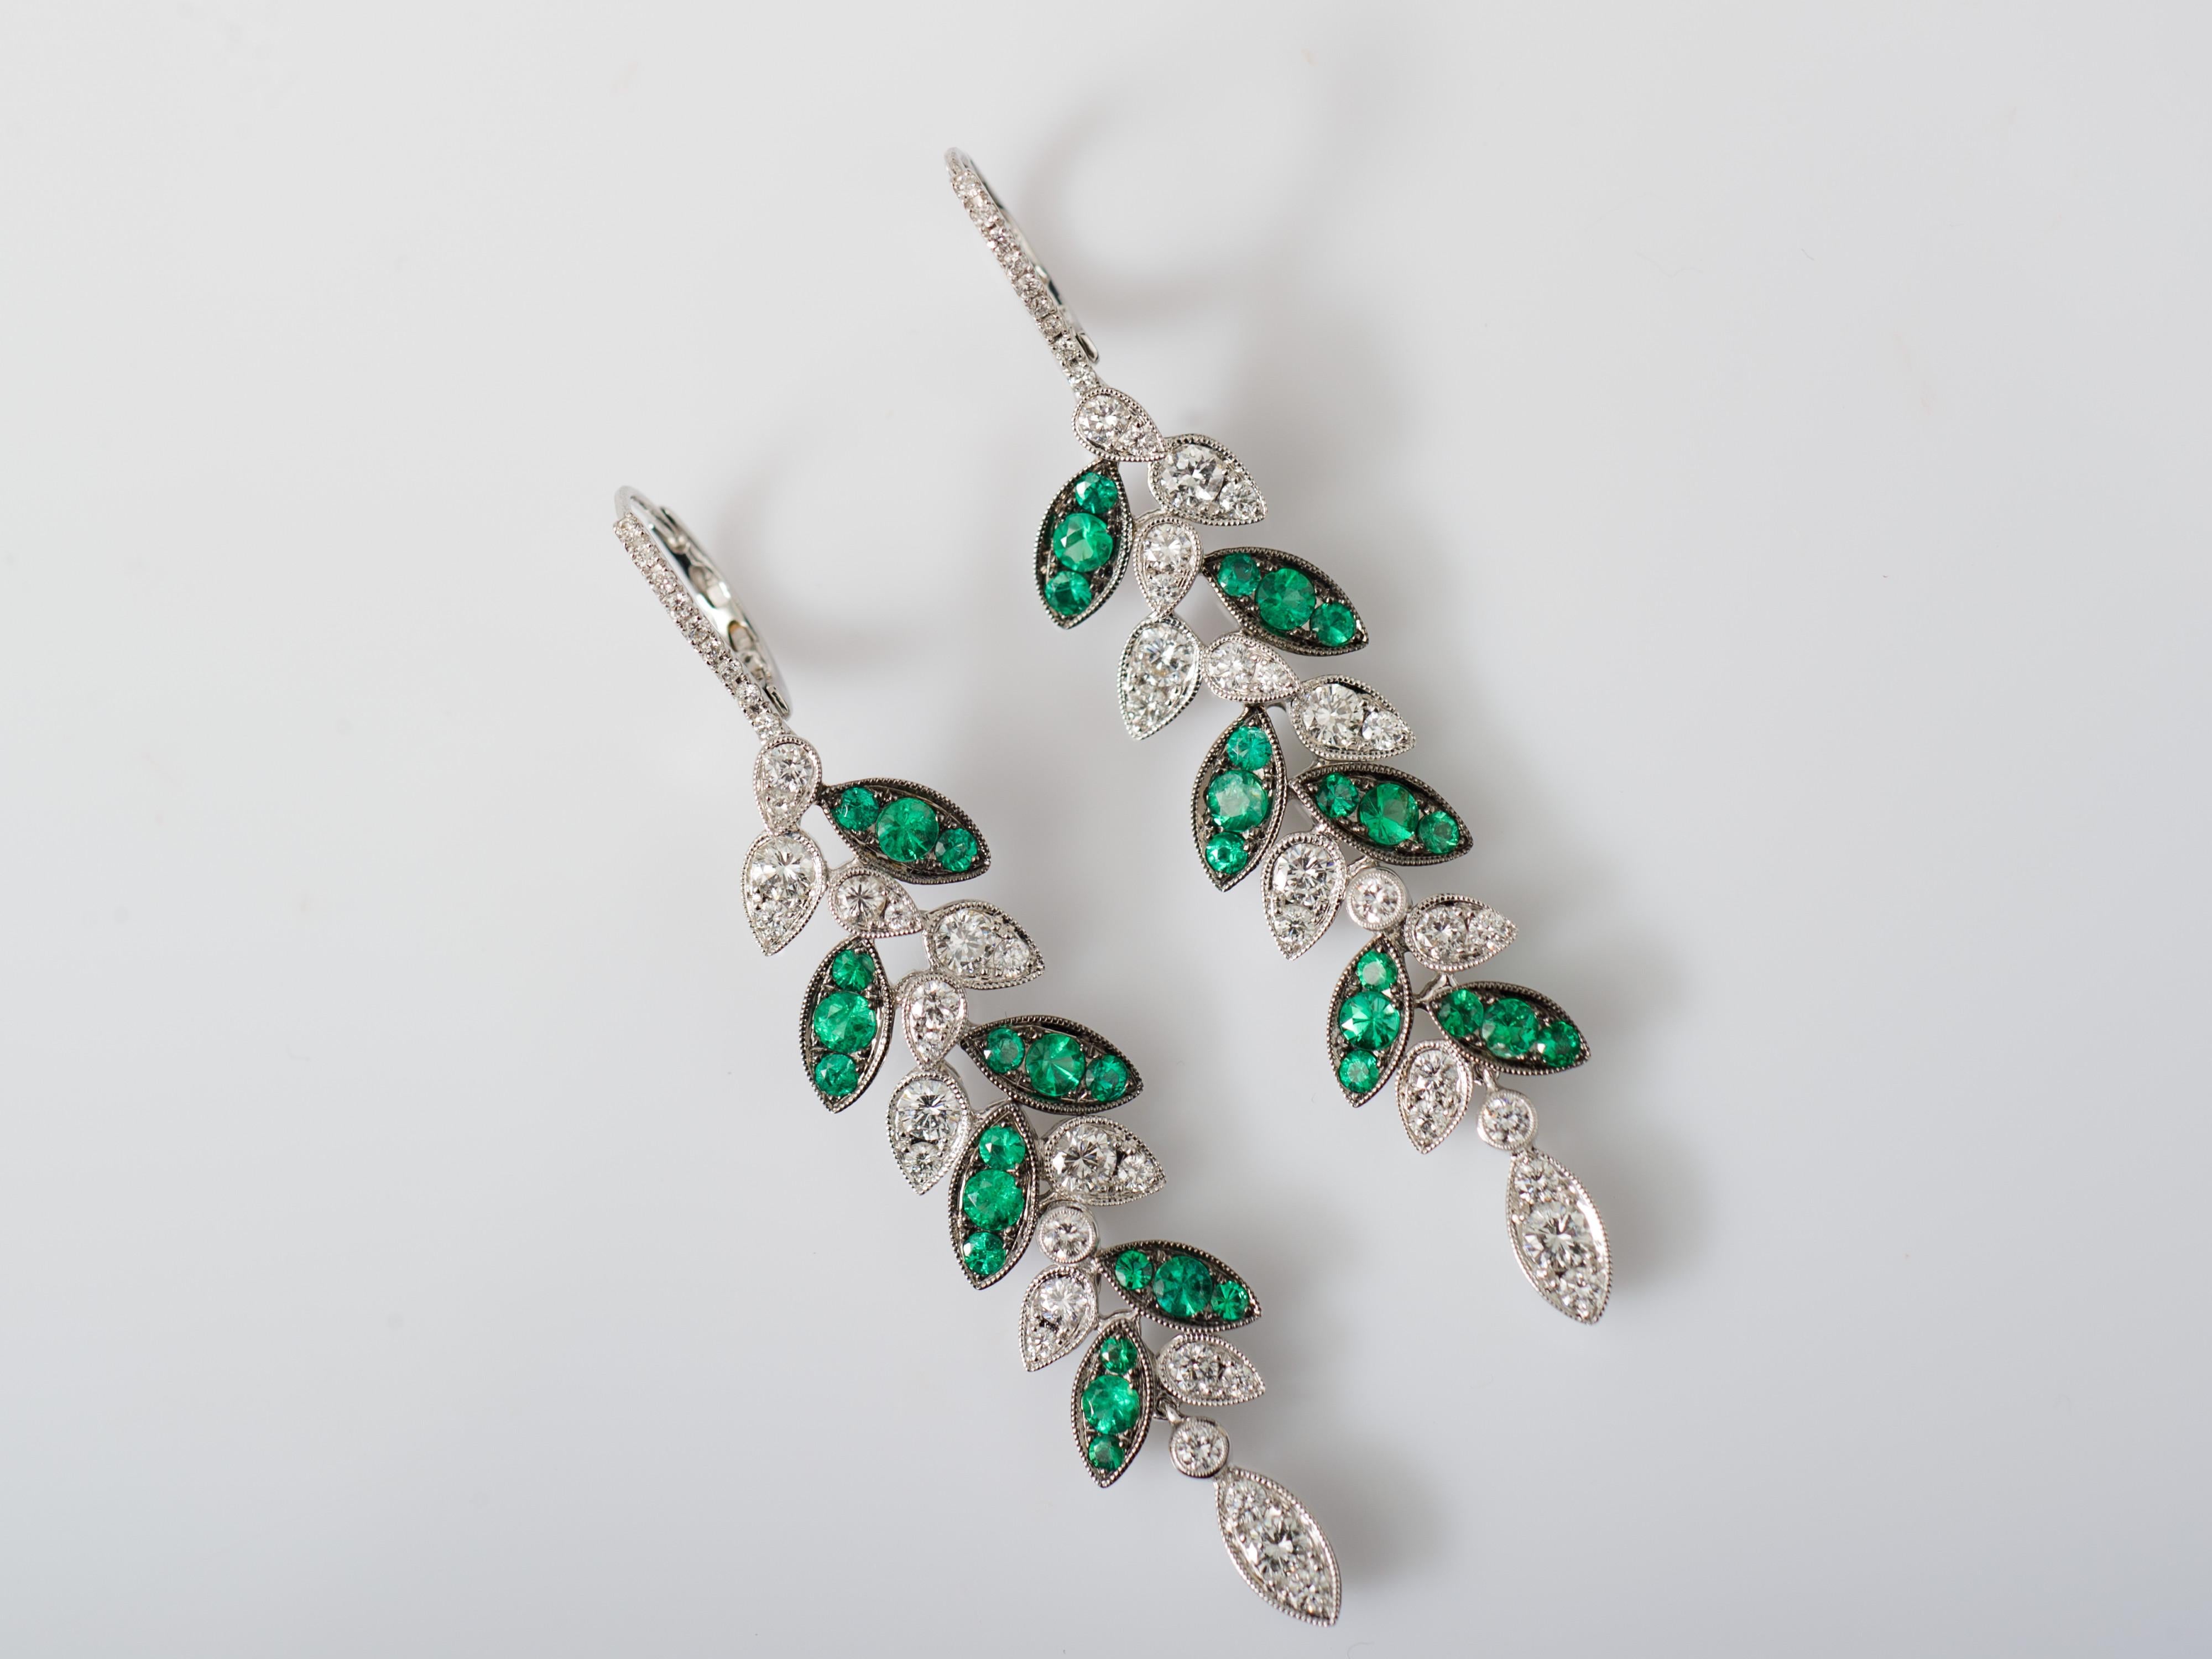 Designed to resemble an elongated leaf, our earrings are crafted in 18k white gold and each small leaf individually set with round Emeralds and Diamonds to give the illusion of larger marquise shaped stones. The earrings are made flexible so they